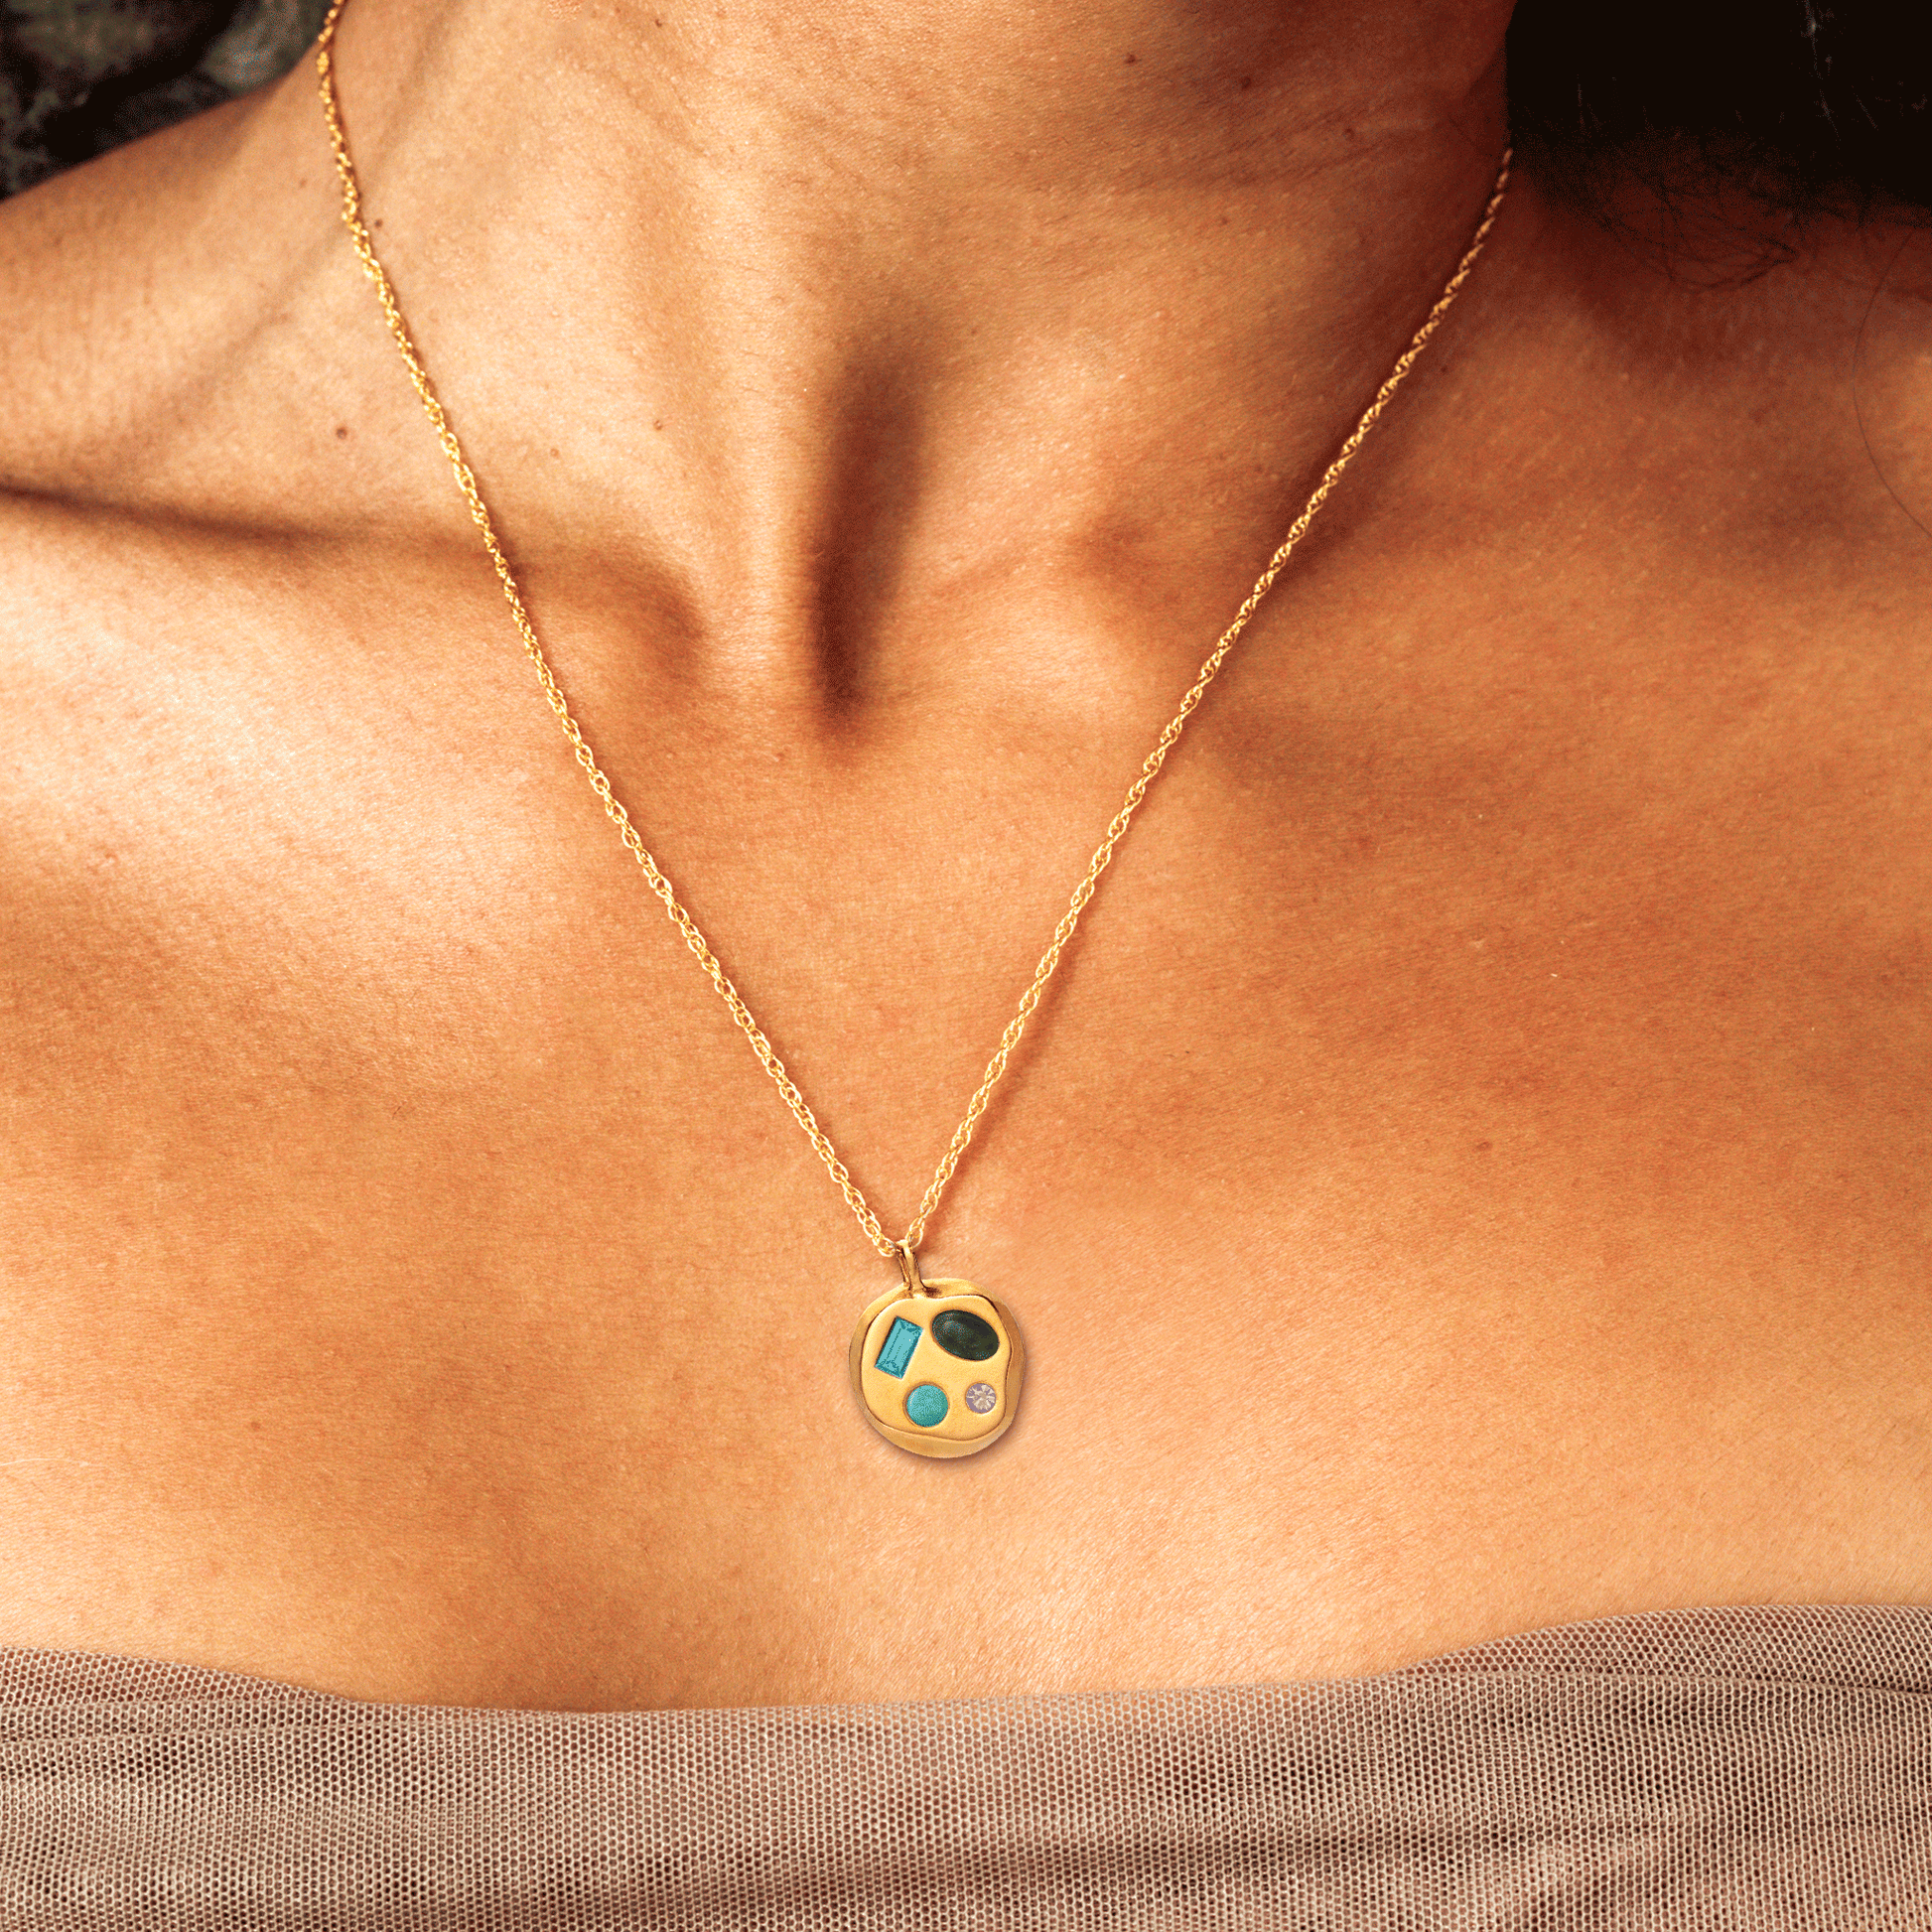 Person wearing The December Fourteenth Pendant